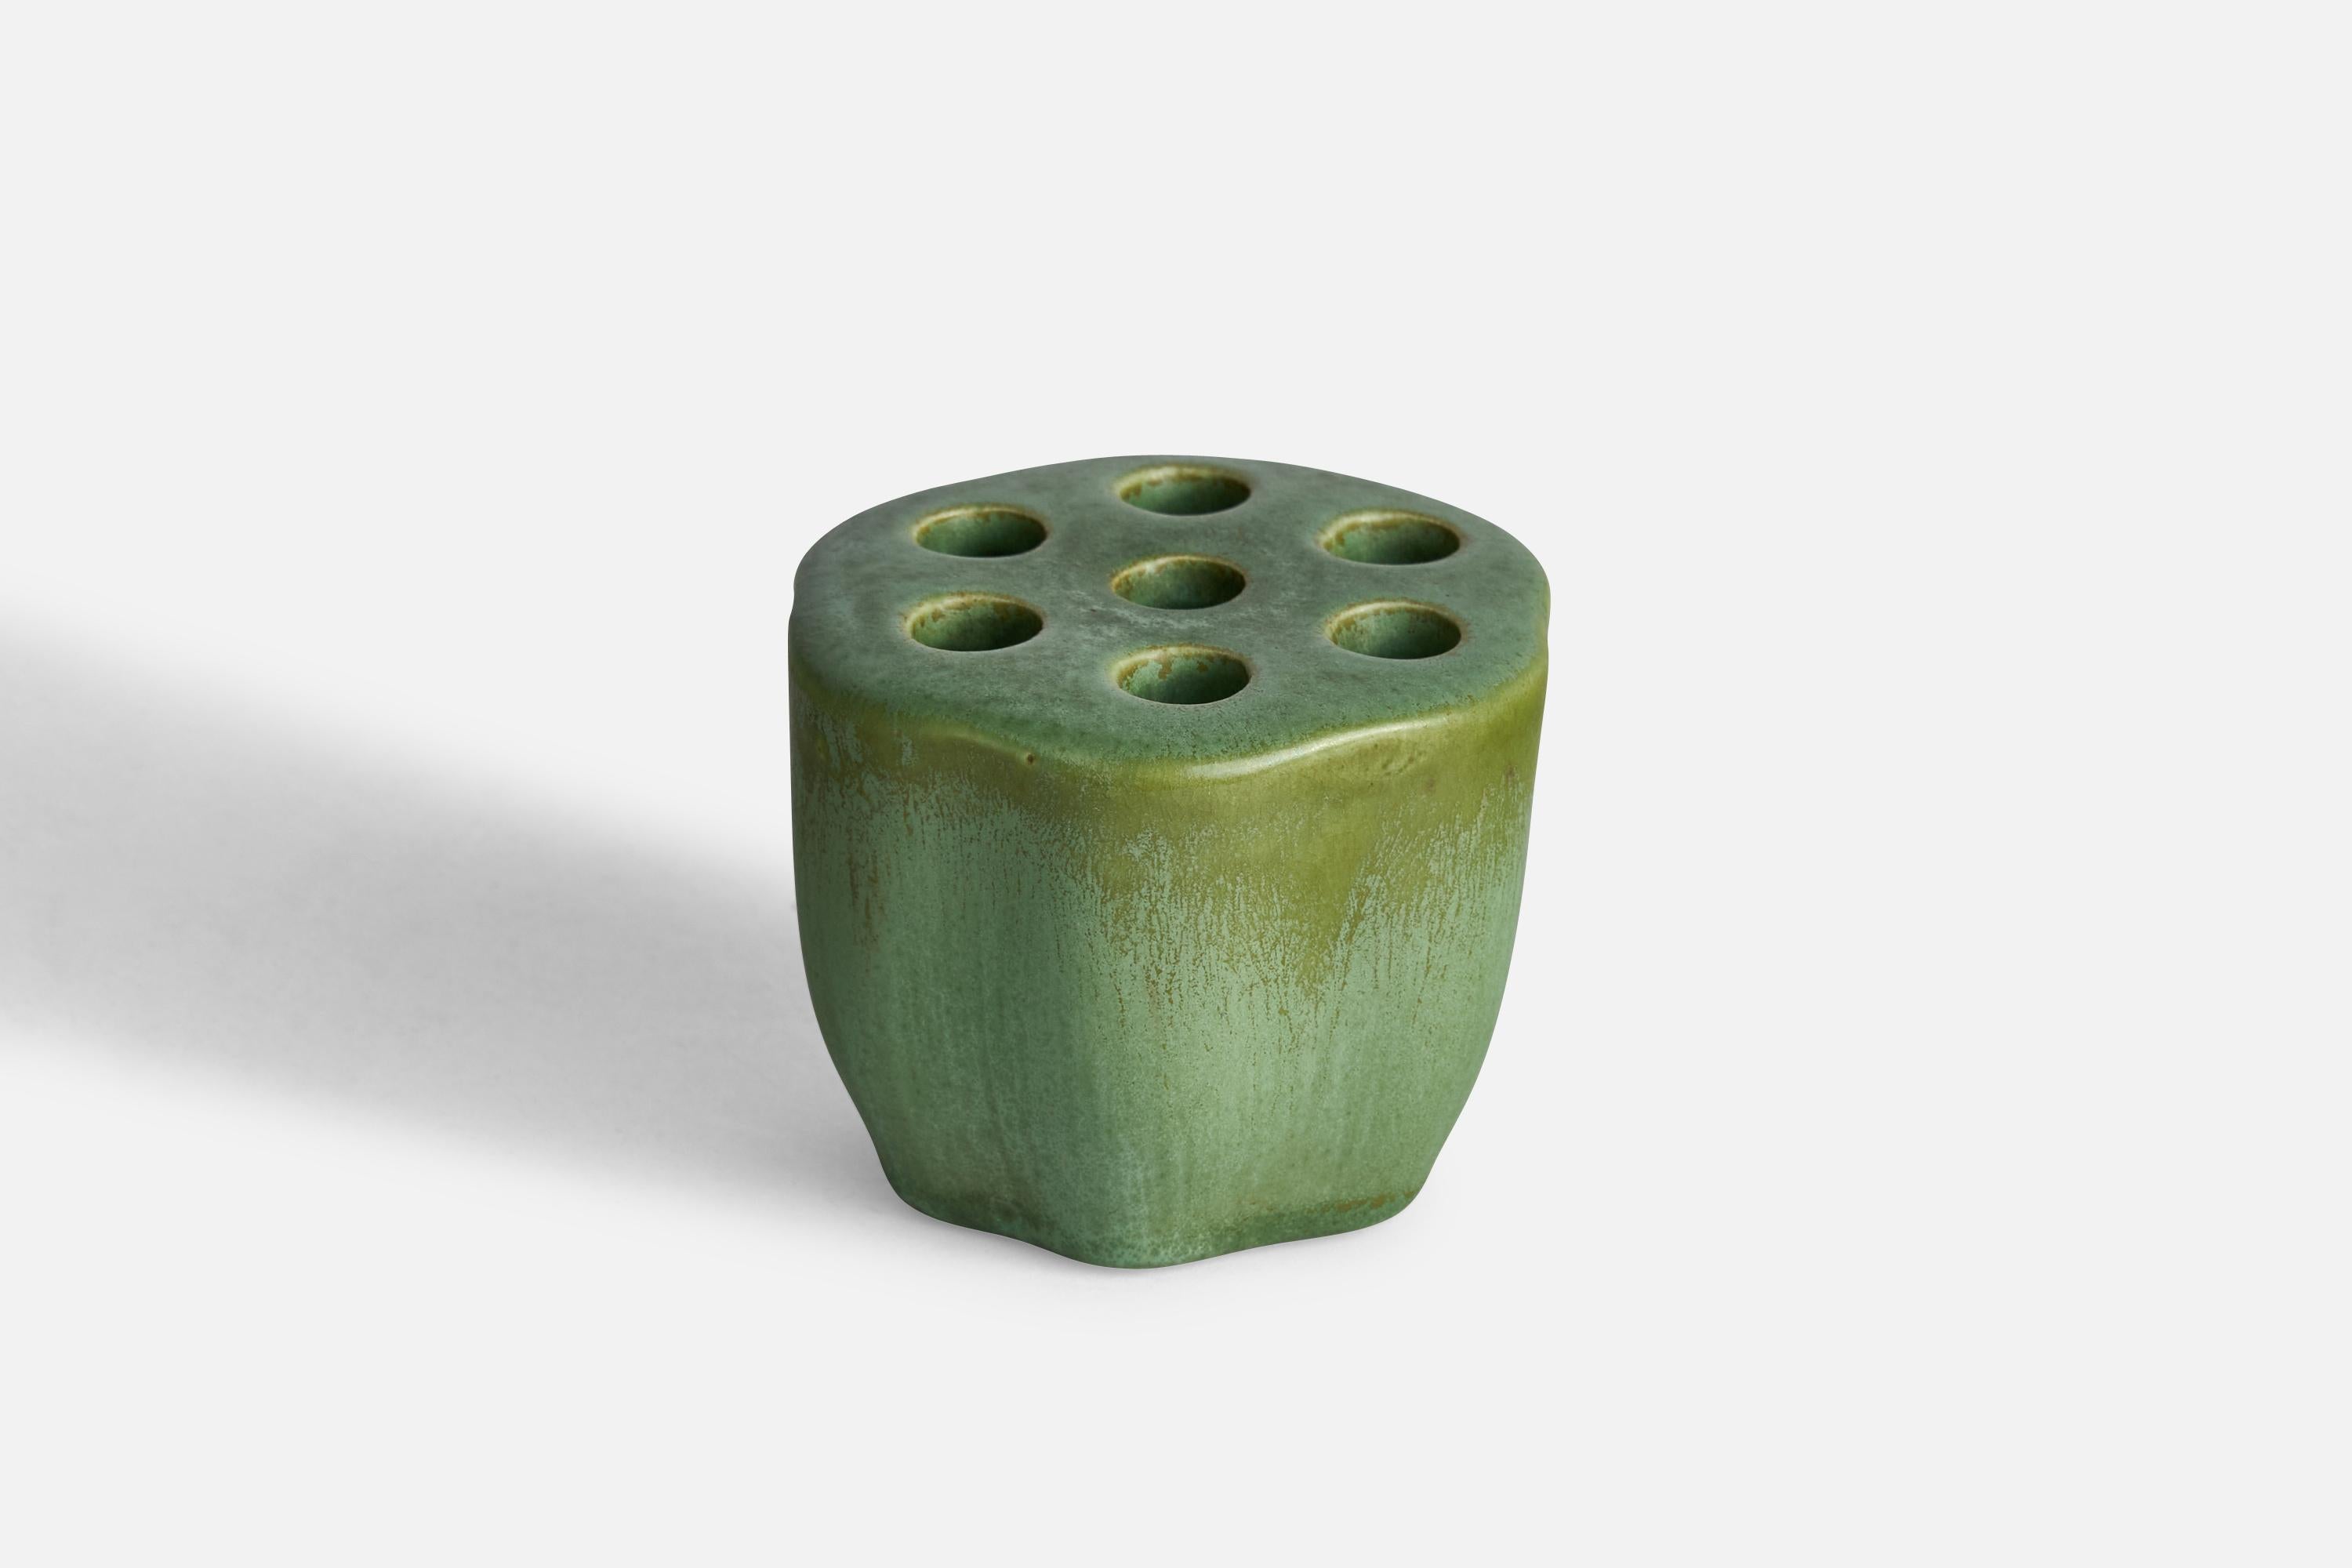 A green-glazed ceramic pen holder designed by Arthur Percy and produced by Gefle, Sweden, c. 1930s.